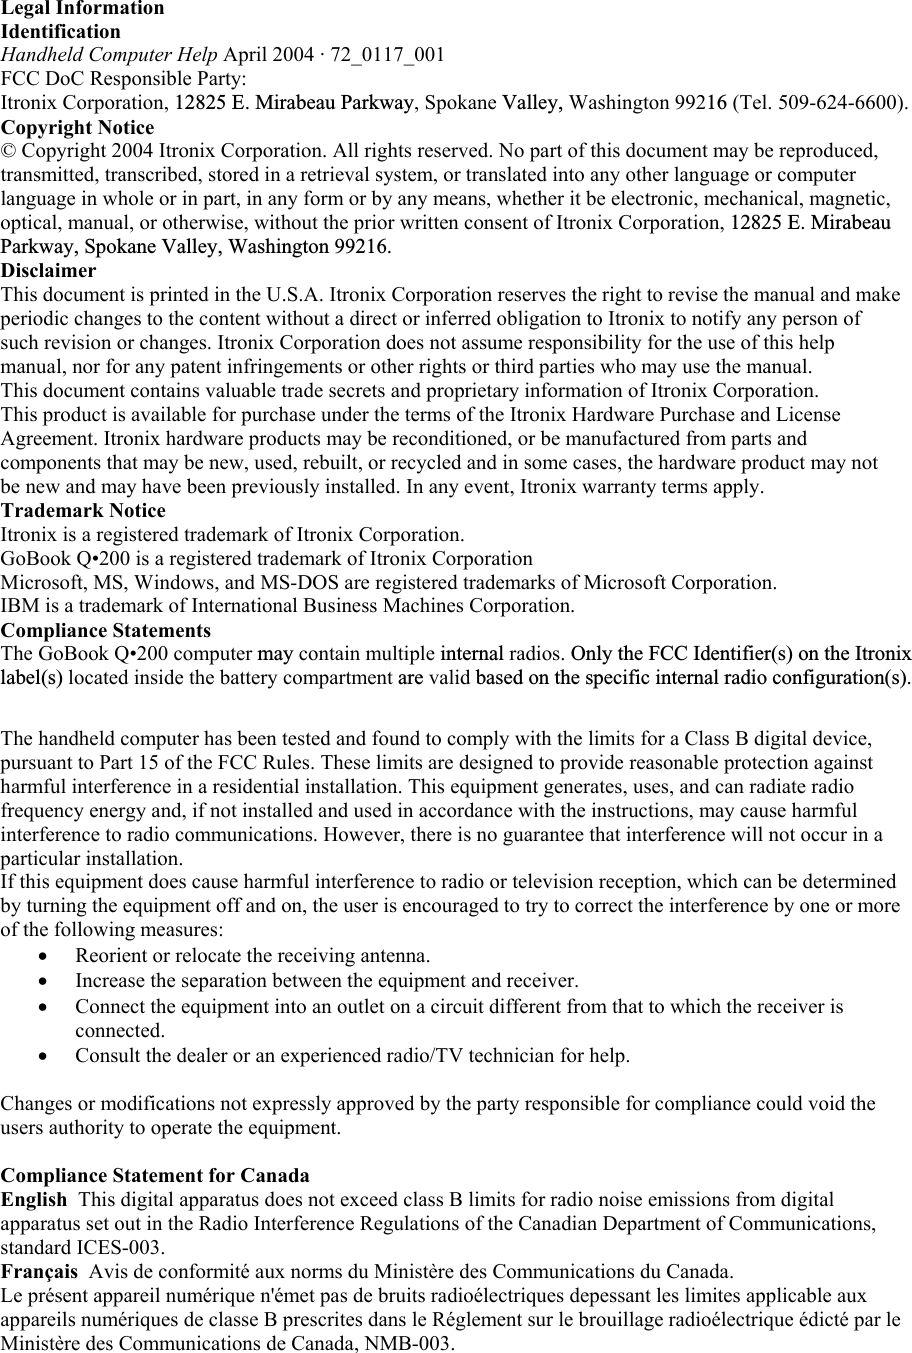 Legal Information  Identification Handheld Computer Help April 2004 · 72_0117_001  FCC DoC Responsible Party: Itronix Corporation, 12825 E. Mirabeau Parkway, Spokane Valley, Washington 99216 (Tel. 509-624-6600). Copyright Notice © Copyright 2004 Itronix Corporation. All rights reserved. No part of this document may be reproduced, transmitted, transcribed, stored in a retrieval system, or translated into any other language or computer language in whole or in part, in any form or by any means, whether it be electronic, mechanical, magnetic, optical, manual, or otherwise, without the prior written consent of Itronix Corporation, 12825 E. Mirabeau Parkway, Spokane Valley, Washington 99216.Disclaimer This document is printed in the U.S.A. Itronix Corporation reserves the right to revise the manual and make periodic changes to the content without a direct or inferred obligation to Itronix to notify any person of such revision or changes. Itronix Corporation does not assume responsibility for the use of this help manual, nor for any patent infringements or other rights or third parties who may use the manual.  This document contains valuable trade secrets and proprietary information of Itronix Corporation.  This product is available for purchase under the terms of the Itronix Hardware Purchase and License Agreement. Itronix hardware products may be reconditioned, or be manufactured from parts and components that may be new, used, rebuilt, or recycled and in some cases, the hardware product may not be new and may have been previously installed. In any event, Itronix warranty terms apply.  Trademark Notice  Itronix is a registered trademark of Itronix Corporation. GoBook Q•200 is a registered trademark of Itronix Corporation Microsoft, MS, Windows, and MS-DOS are registered trademarks of Microsoft Corporation. IBM is a trademark of International Business Machines Corporation.  Compliance Statements  The GoBook Q•200 computer may contain multiple internal radios. Only the FCC Identifier(s) on the Itronixlabel(s) located inside the battery compartment are valid based on the specific internal radio configuration(s).The handheld computer has been tested and found to comply with the limits for a Class B digital device, pursuant to Part 15 of the FCC Rules. These limits are designed to provide reasonable protection against harmful interference in a residential installation. This equipment generates, uses, and can radiate radio frequency energy and, if not installed and used in accordance with the instructions, may cause harmful interference to radio communications. However, there is no guarantee that interference will not occur in a particular installation.  If this equipment does cause harmful interference to radio or television reception, which can be determined by turning the equipment off and on, the user is encouraged to try to correct the interference by one or more of the following measures: •  Reorient or relocate the receiving antenna.  •  Increase the separation between the equipment and receiver.  •  Connect the equipment into an outlet on a circuit different from that to which the receiver is connected.  •  Consult the dealer or an experienced radio/TV technician for help.   Changes or modifications not expressly approved by the party responsible for compliance could void the users authority to operate the equipment.  Compliance Statement for Canada  English  This digital apparatus does not exceed class B limits for radio noise emissions from digital apparatus set out in the Radio Interference Regulations of the Canadian Department of Communications, standard ICES-003.  Français  Avis de conformité aux norms du Ministère des Communications du Canada.  Le présent appareil numérique n&apos;émet pas de bruits radioélectriques depessant les limites applicable aux appareils numériques de classe B prescrites dans le Réglement sur le brouillage radioélectrique édicté par le Ministère des Communications de Canada, NMB-003.    